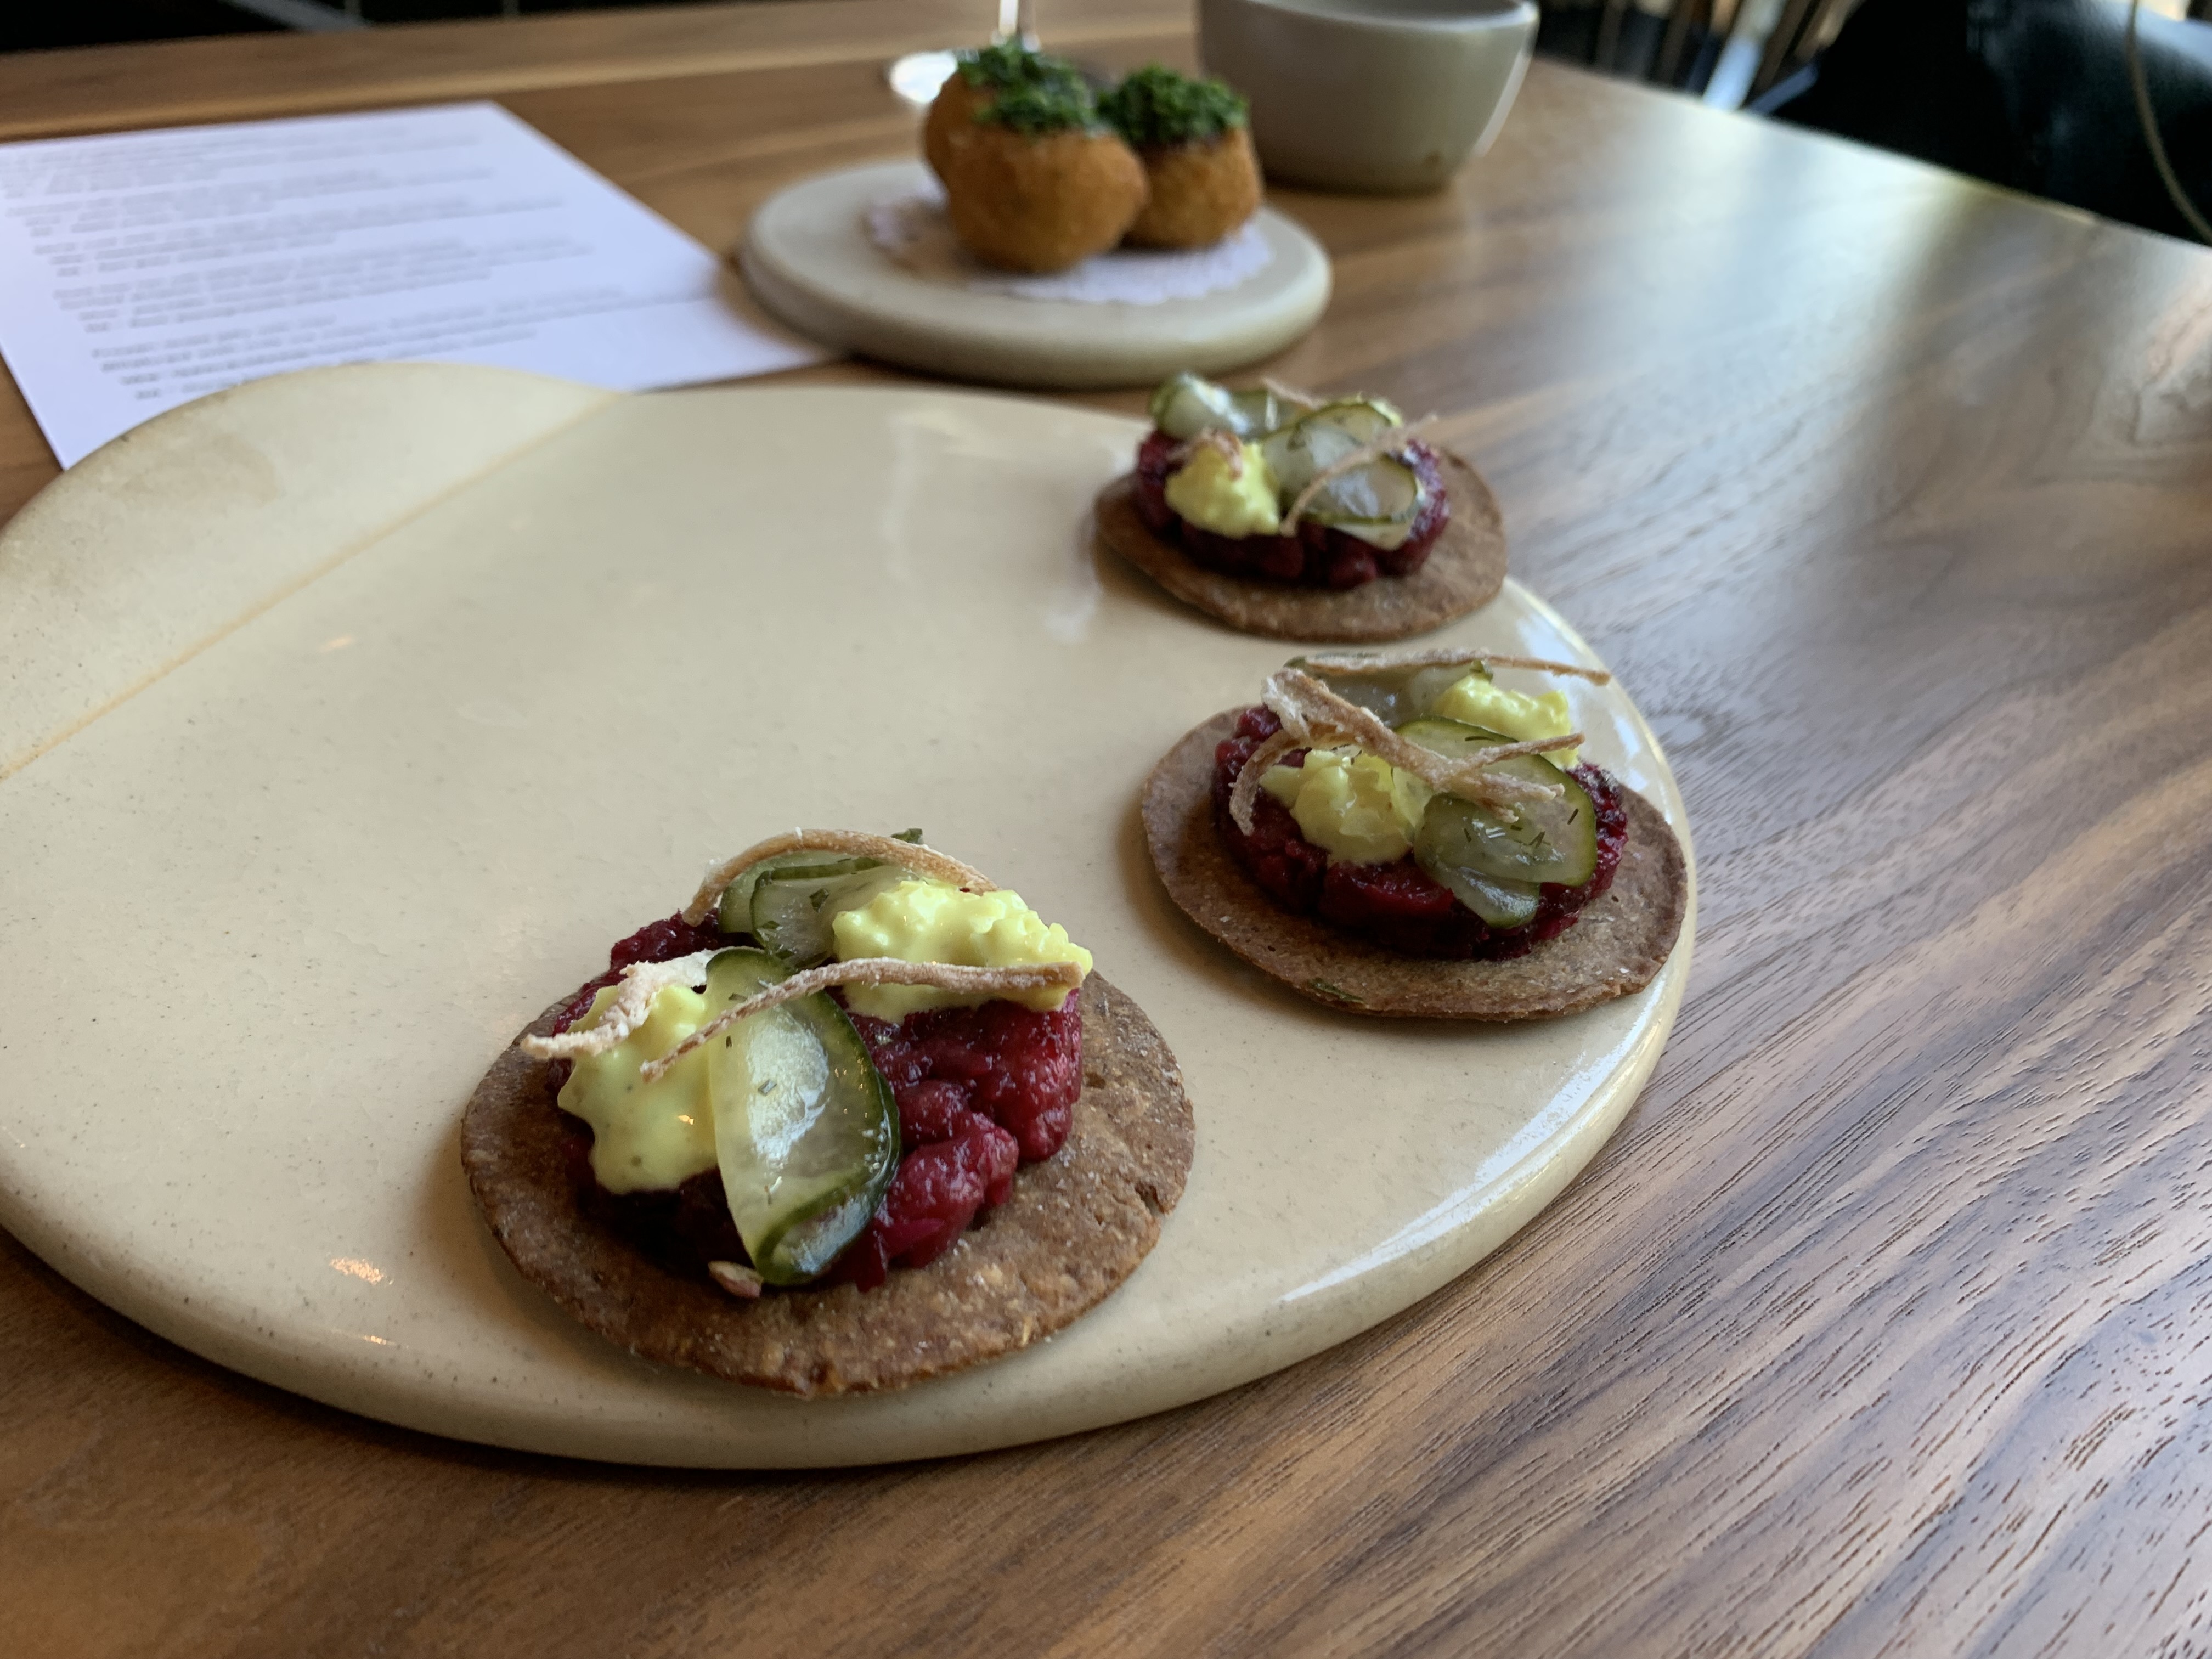 Thin pickles folded over atop a bed of red, raw meat, served on a dark brown disc of cracker.